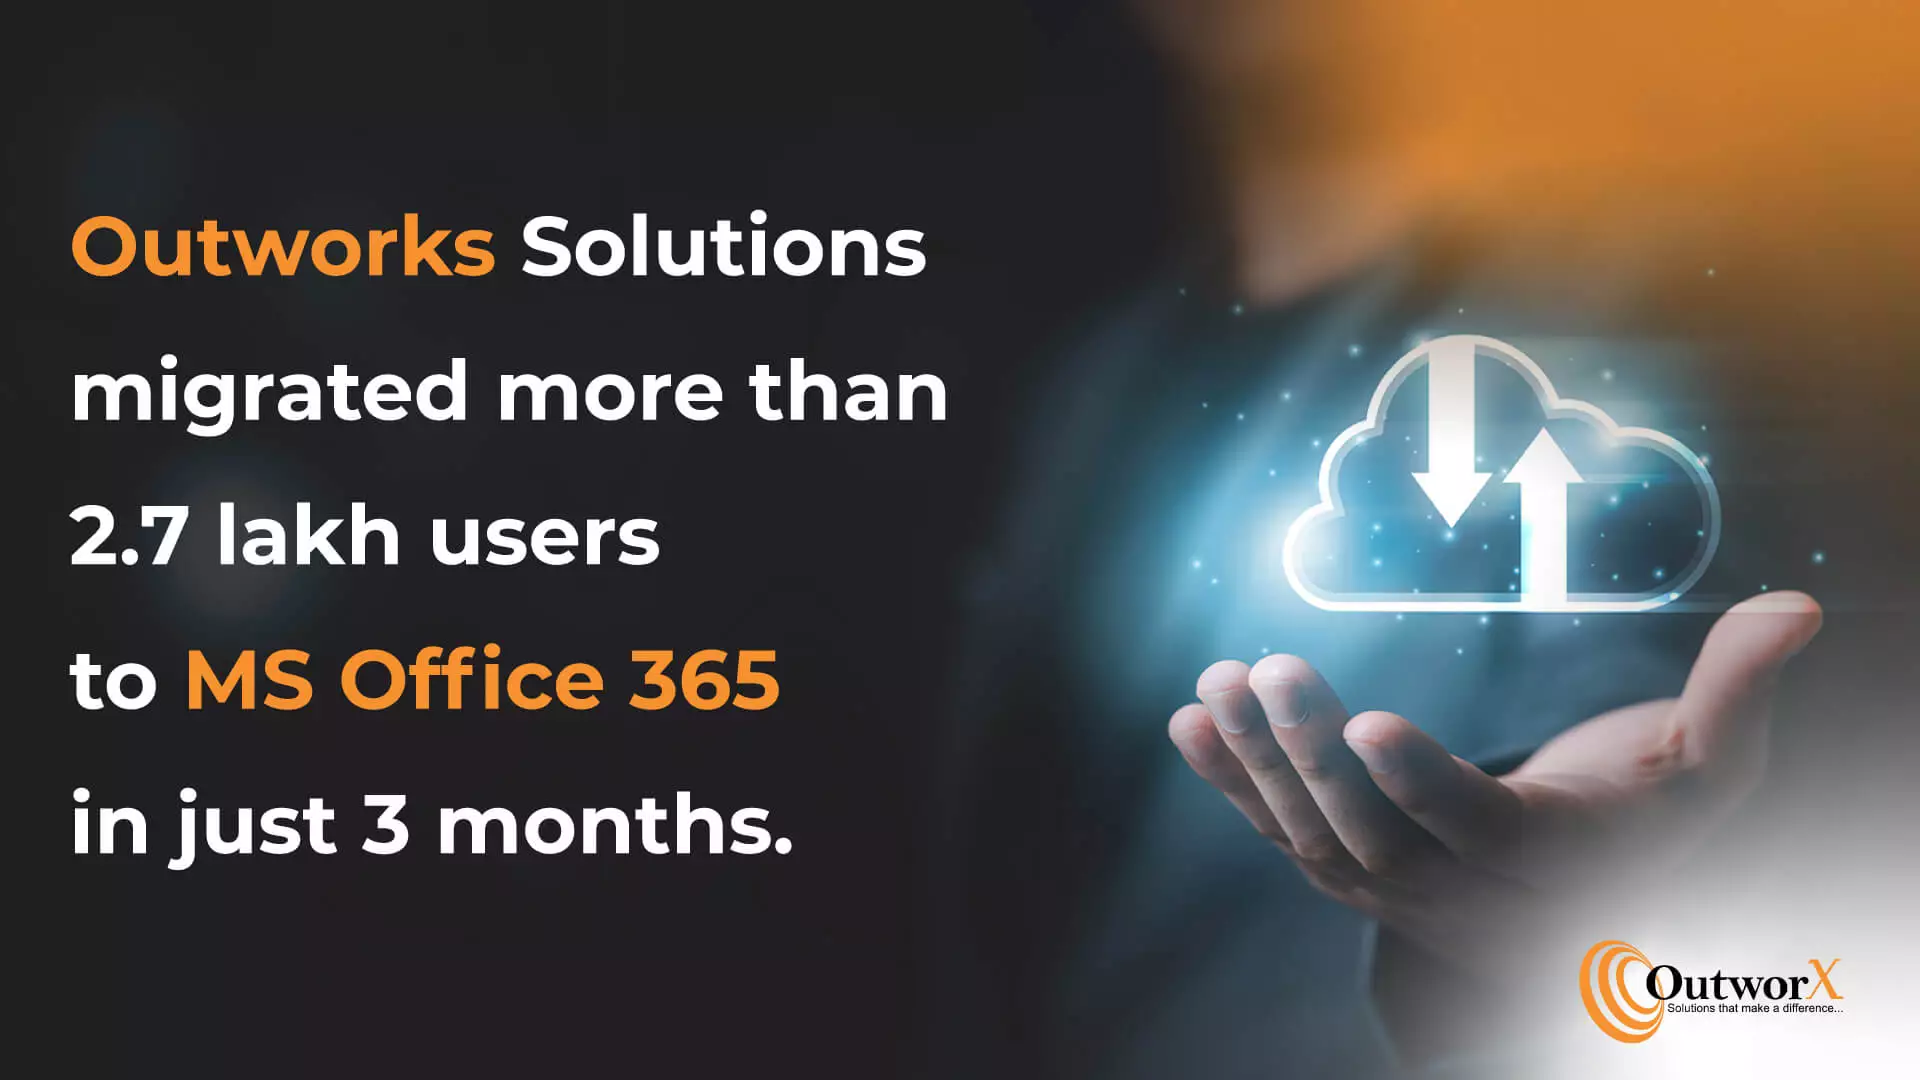 outworks solutions private ltd, outworx, staff augmentation services, software consulting, it infrastructure managed services, it service provider in india, ms office implementation and migration, data migration services, infrastructure staffing